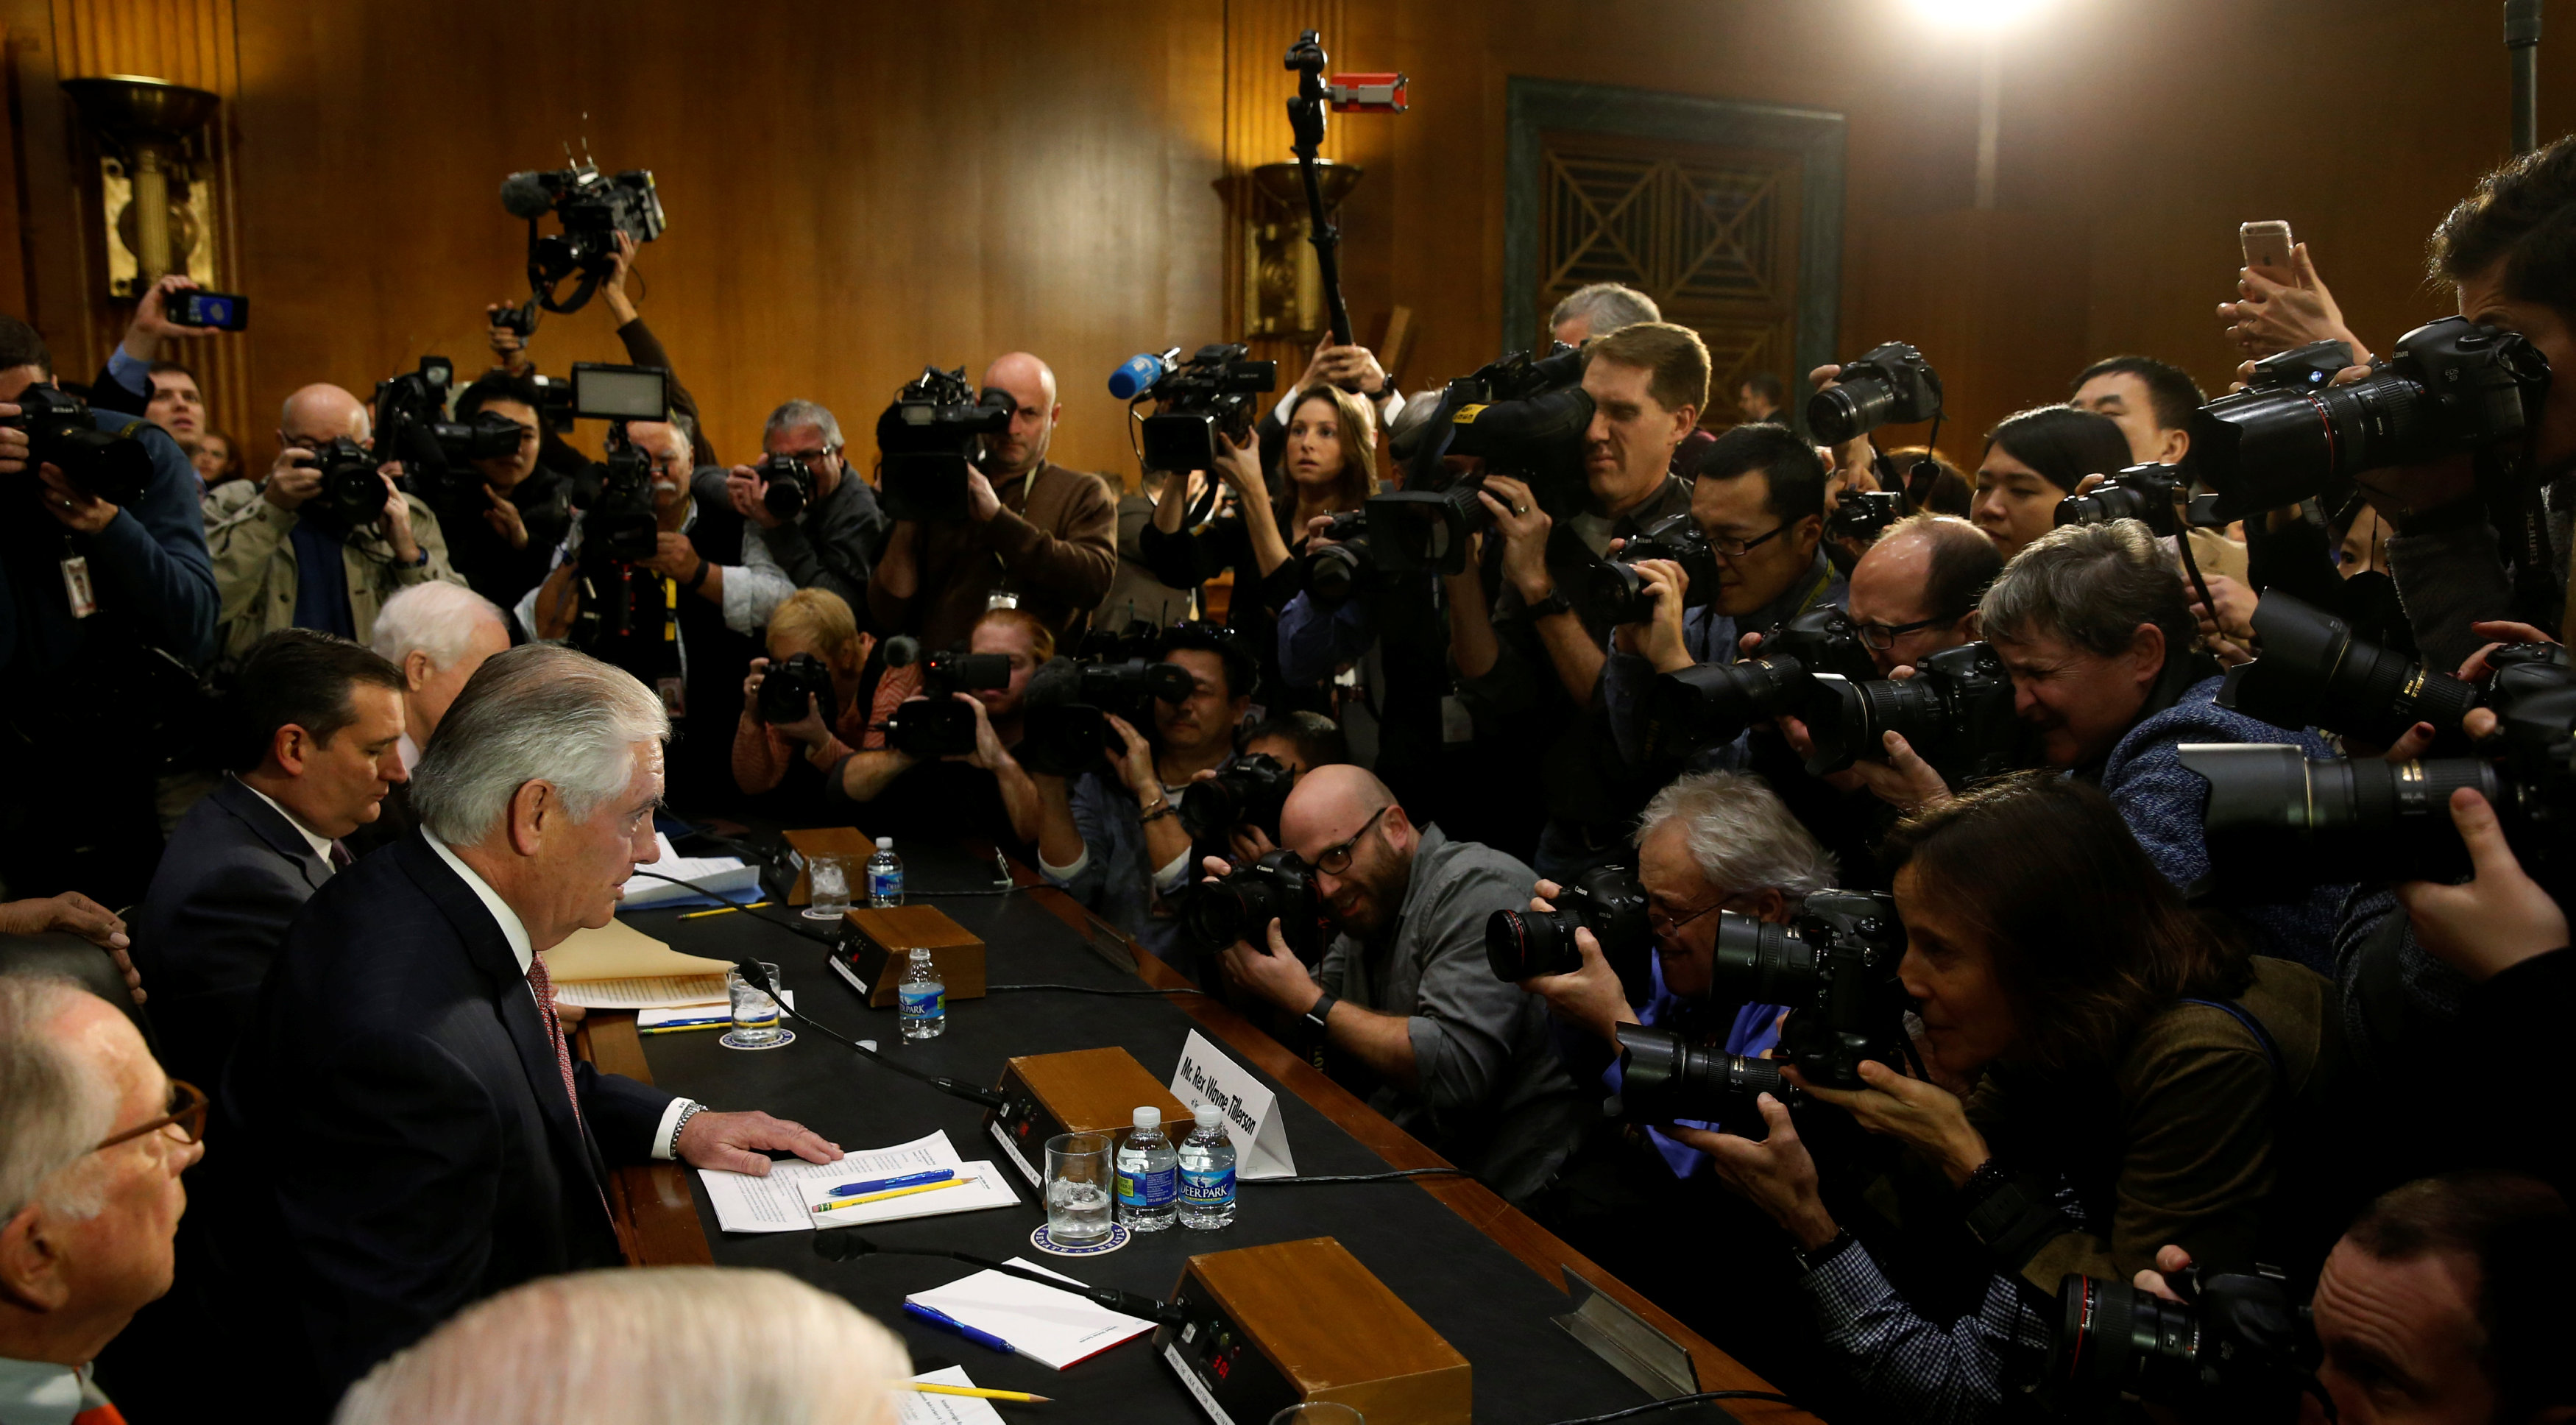 Rex Tillerson (L), the former chairman and chief executive officer of Exxon Mobil, takes his seat to testify before a Senate Foreign Relations Committee confirmation hearing on his nomination to be U.S. secretary of state in Washington, U.S. January 11, 2017.  REUTERS/Jonathan Ernst